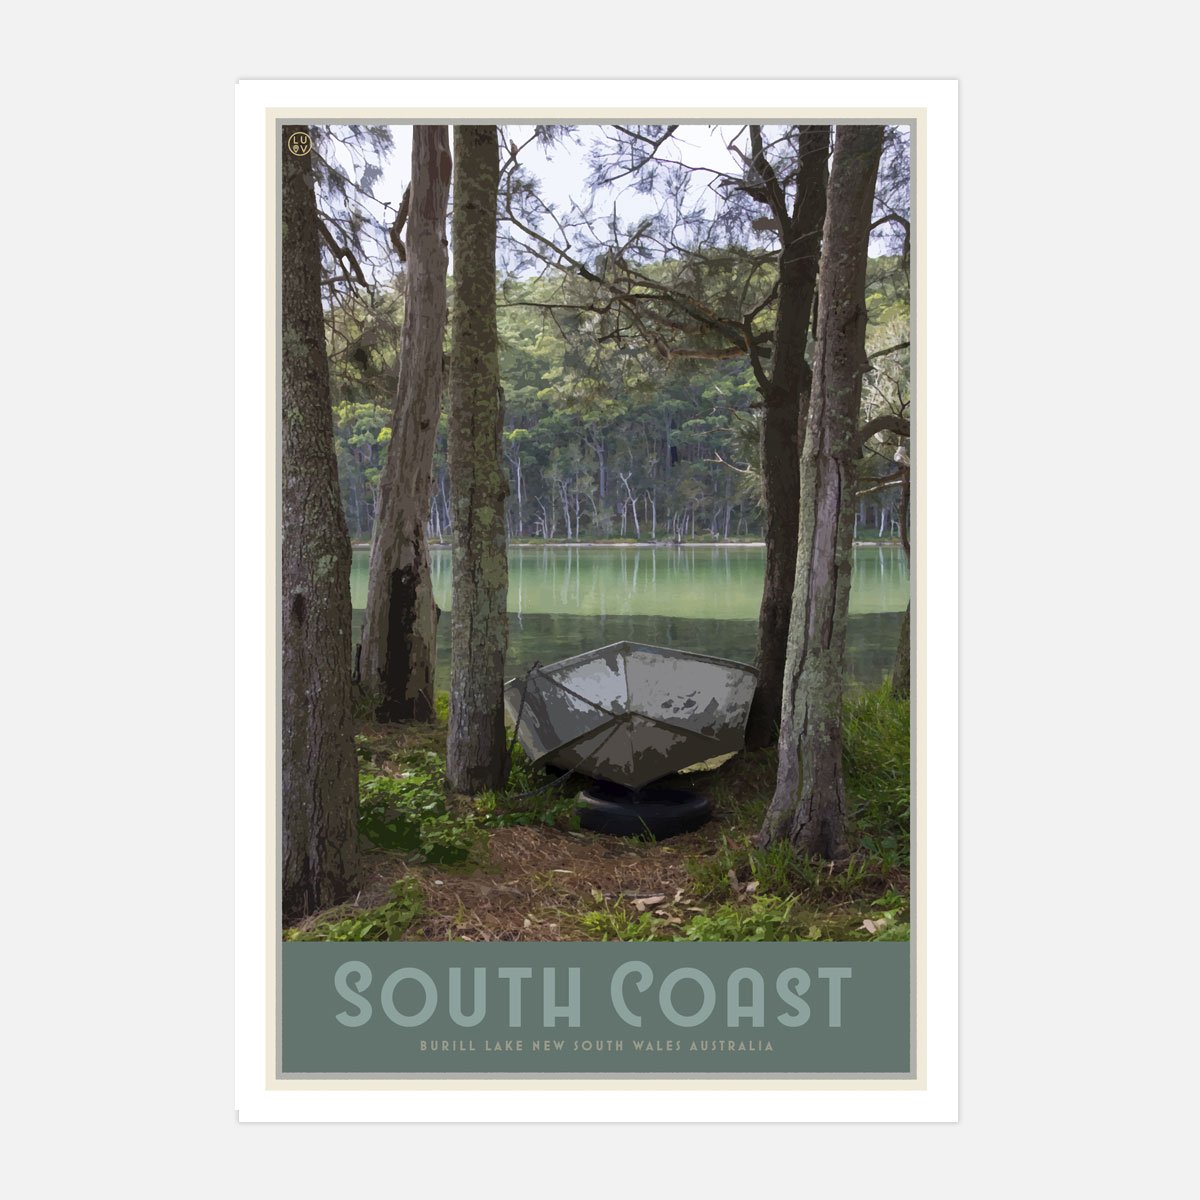 South Coast print and poster, vintage travel style designed by Places We Luv